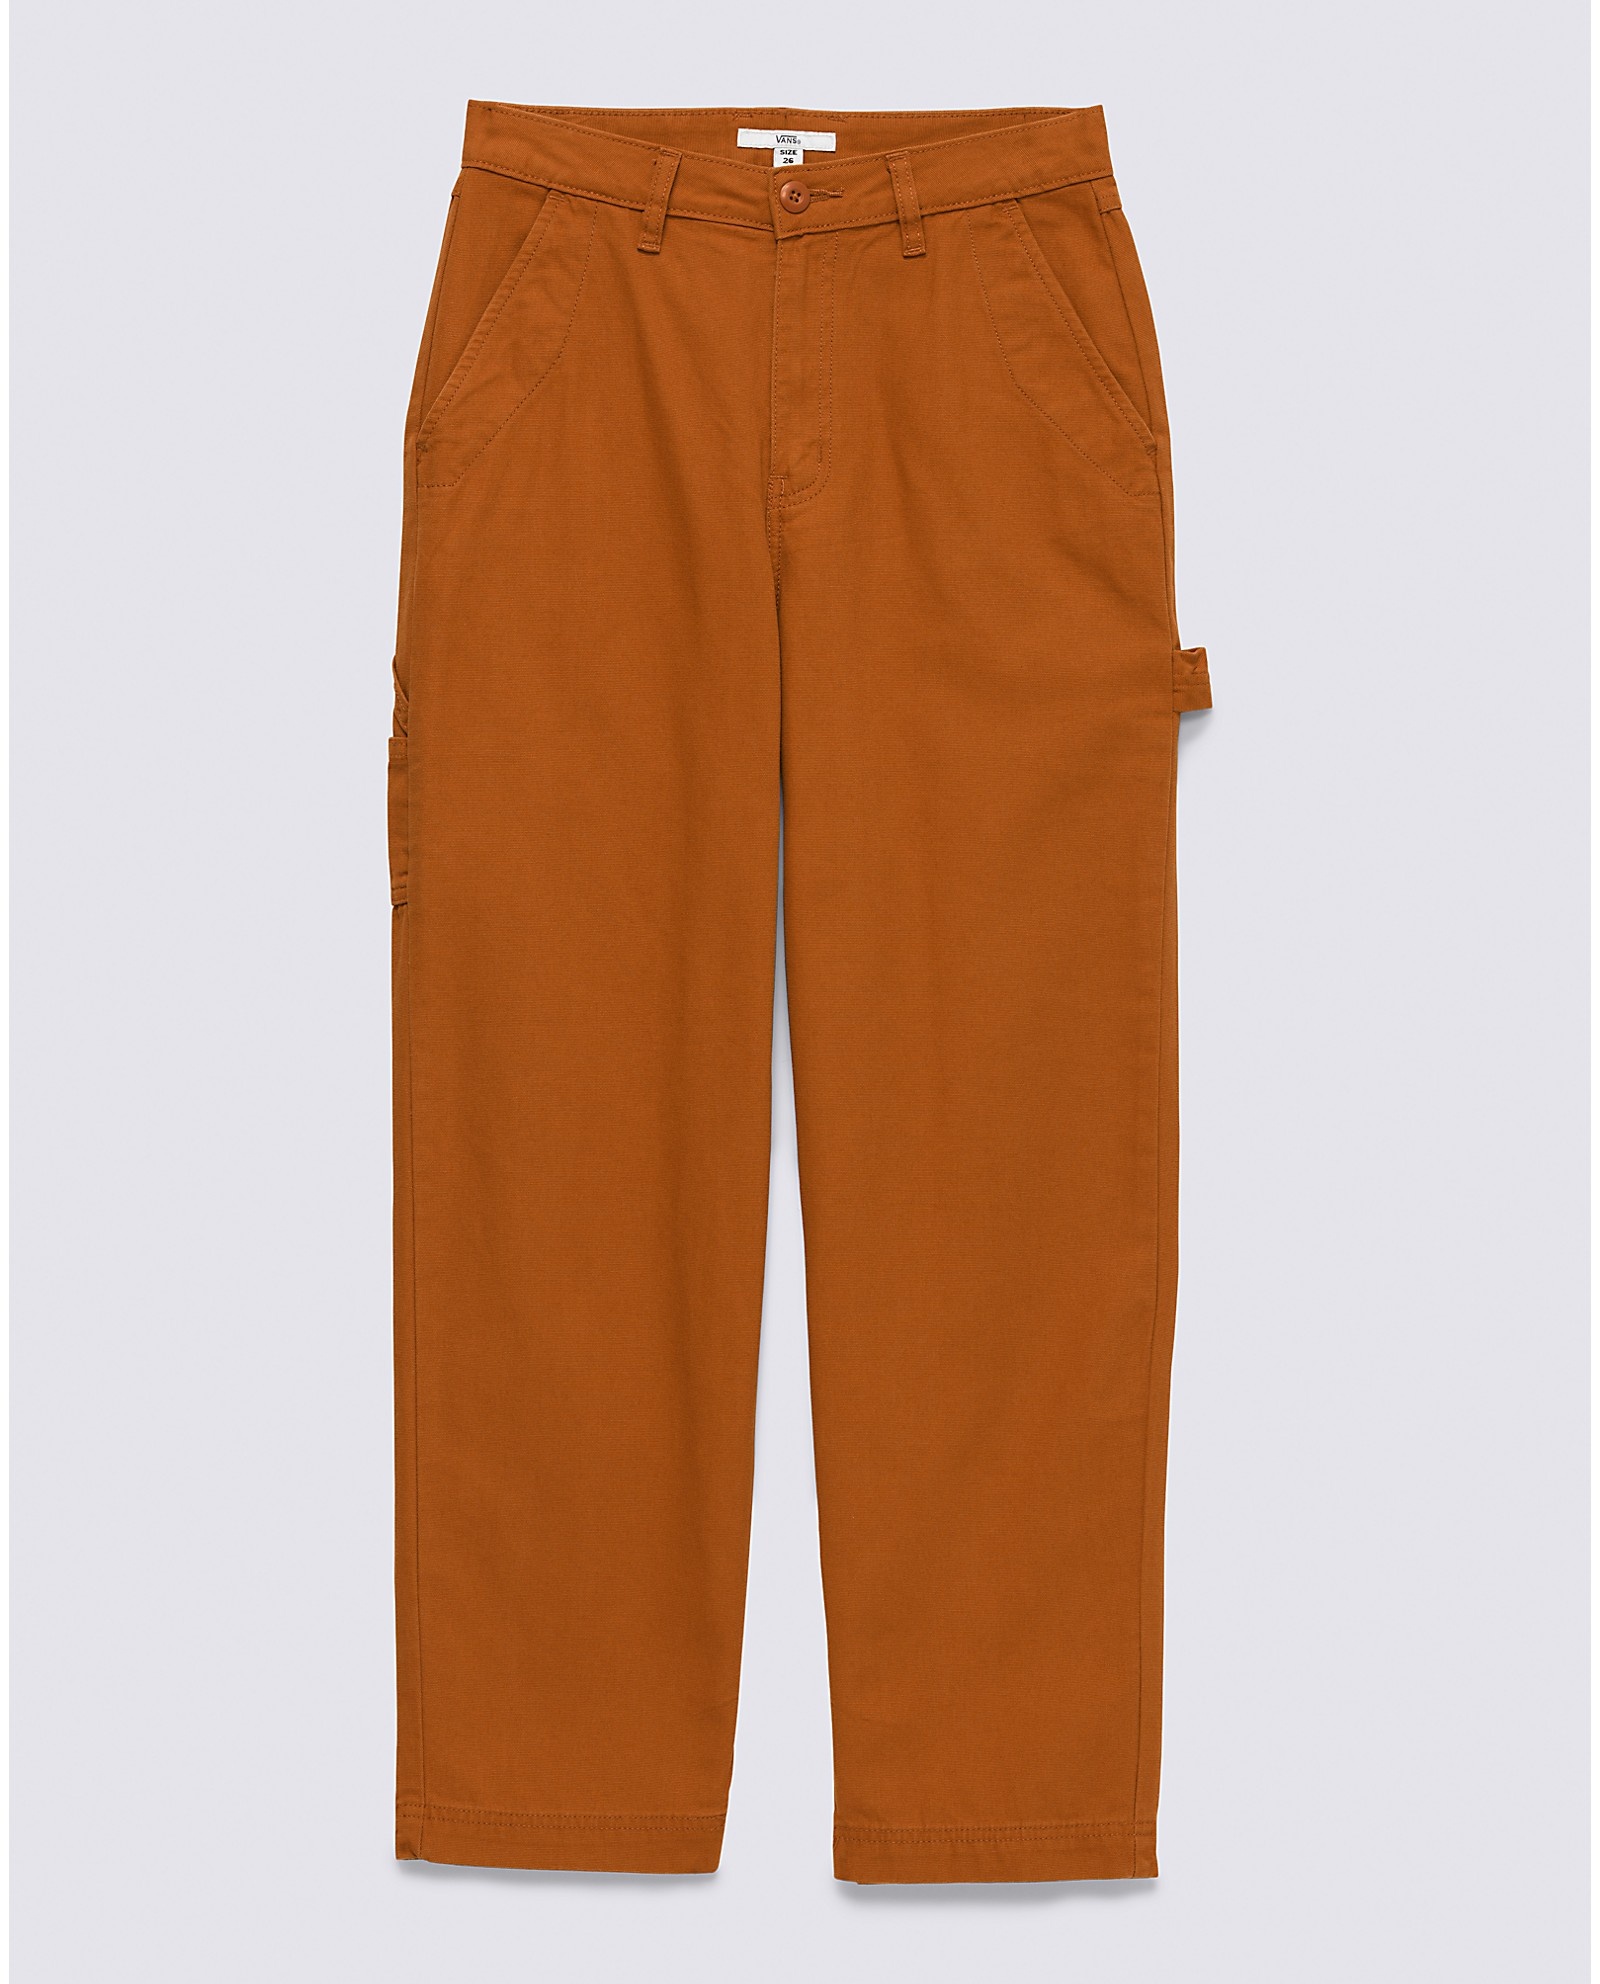 Ground Work Pant  Ginger Bread - The Choice Shop